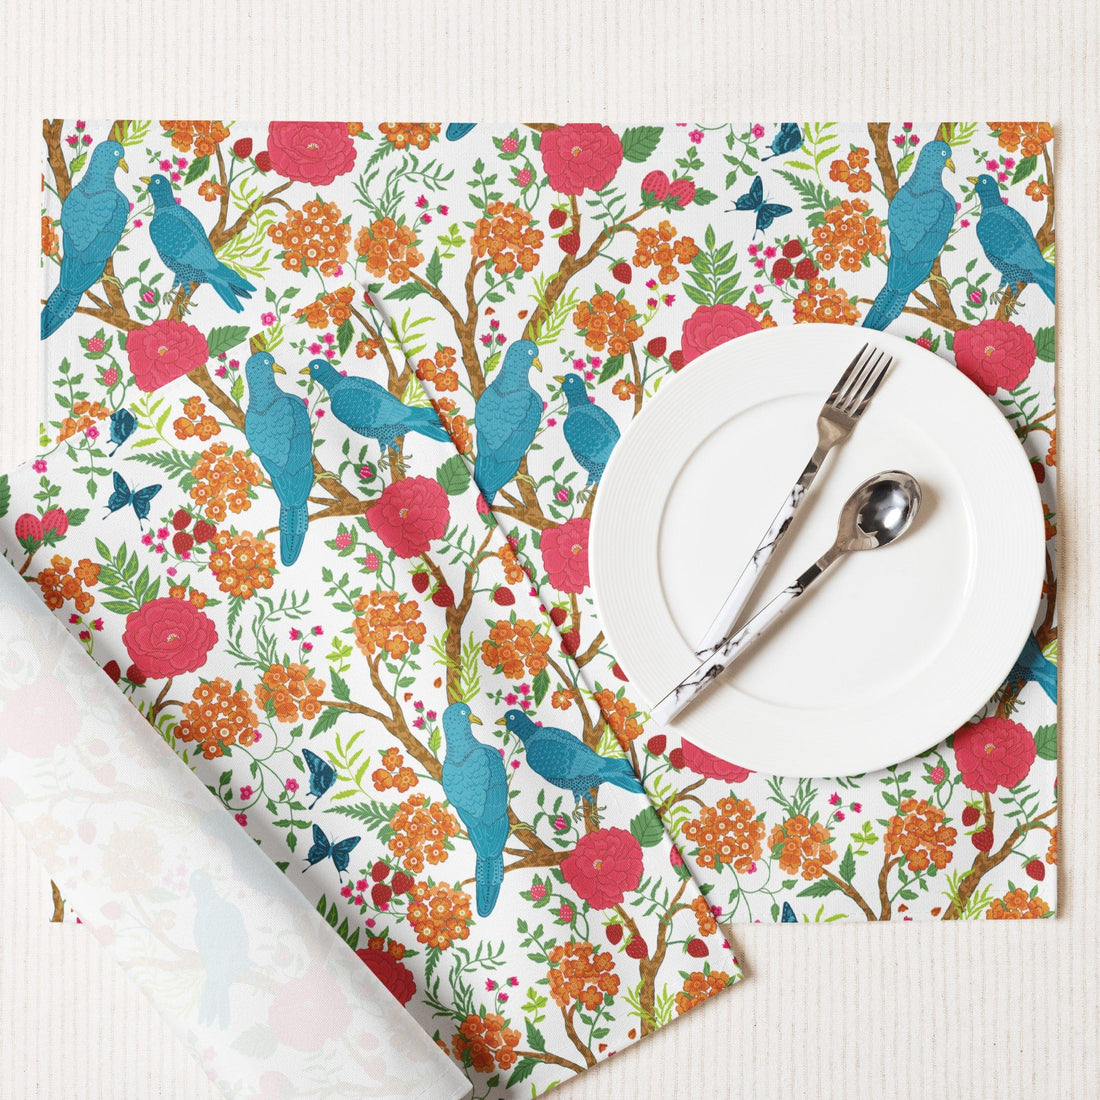 Kate McEnroe New York Set of 4 Chinoiserie Floral and Exotic Bird Botanical Garden Placemats in Pink, Green, Orange and Blue by Kate McEnroe New York - KM13809925Placemats9417303_17484